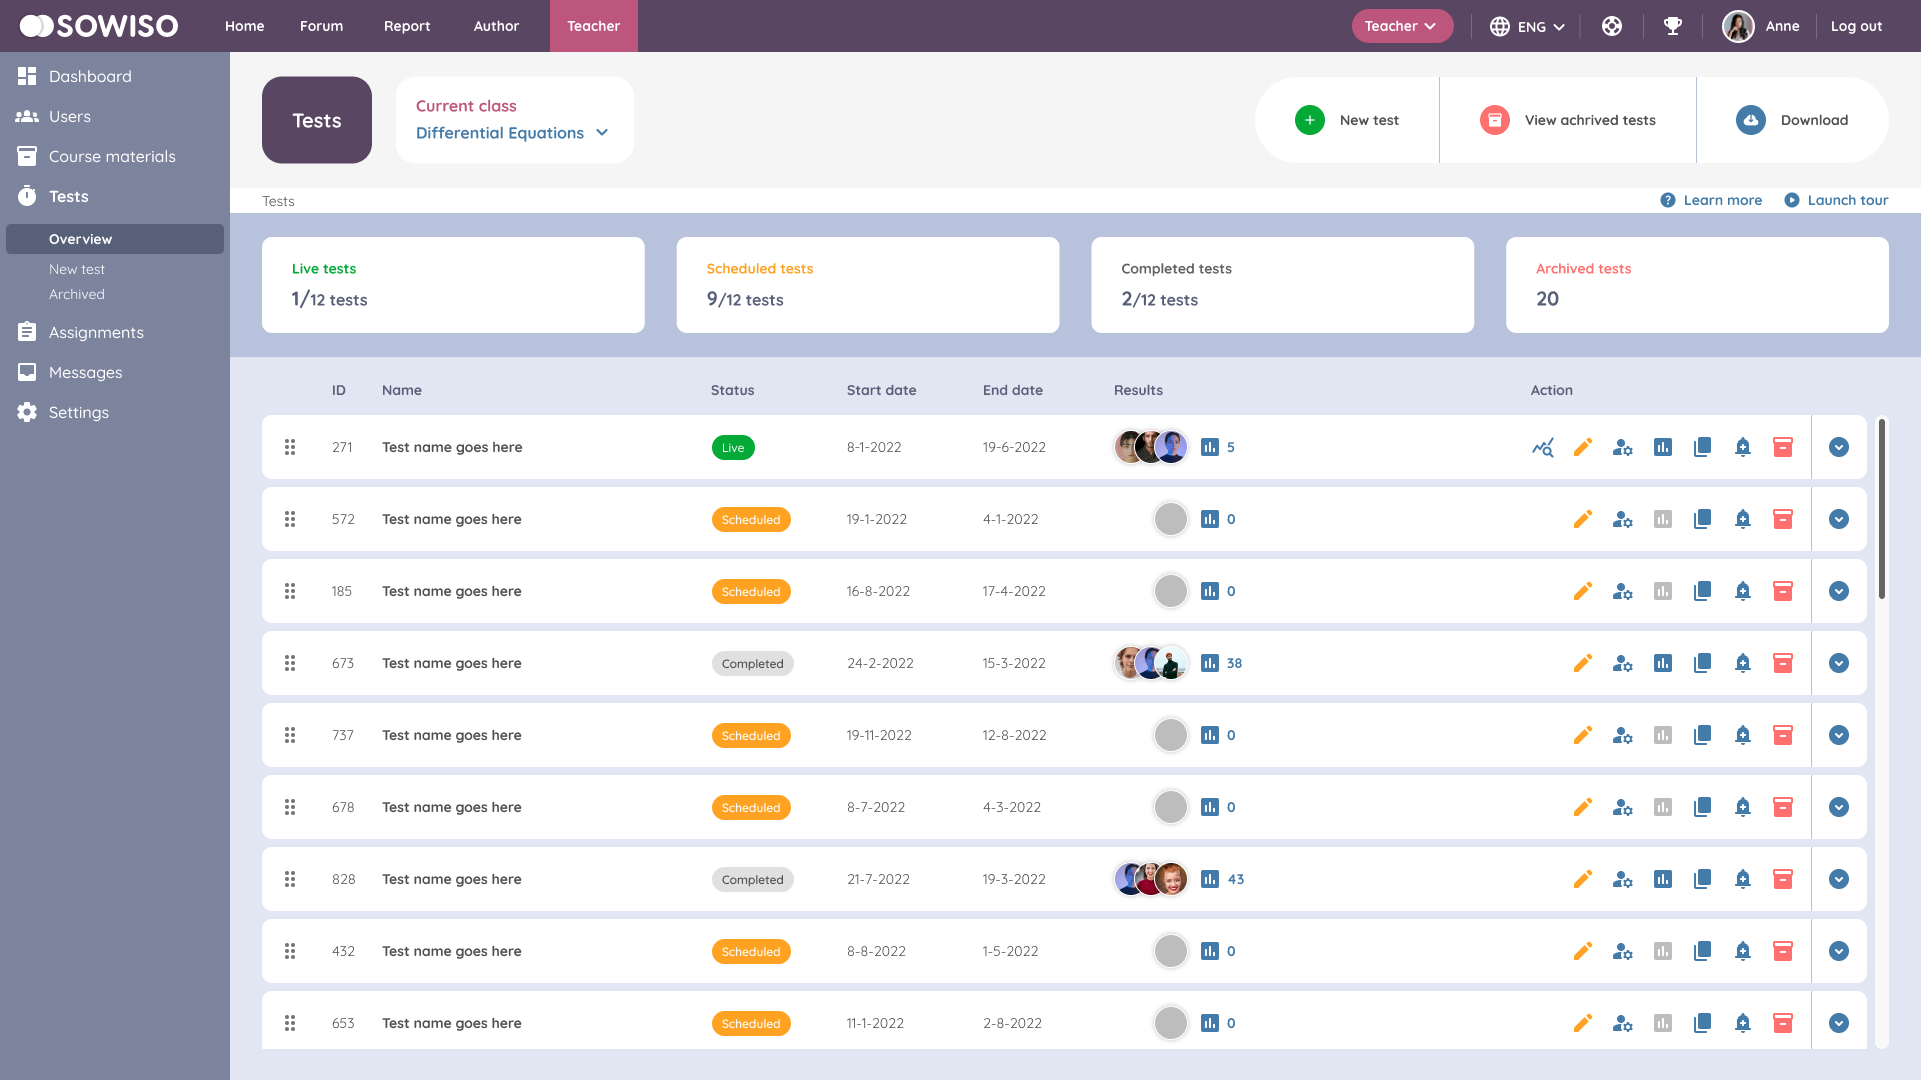 Screenshot new sowiso interface